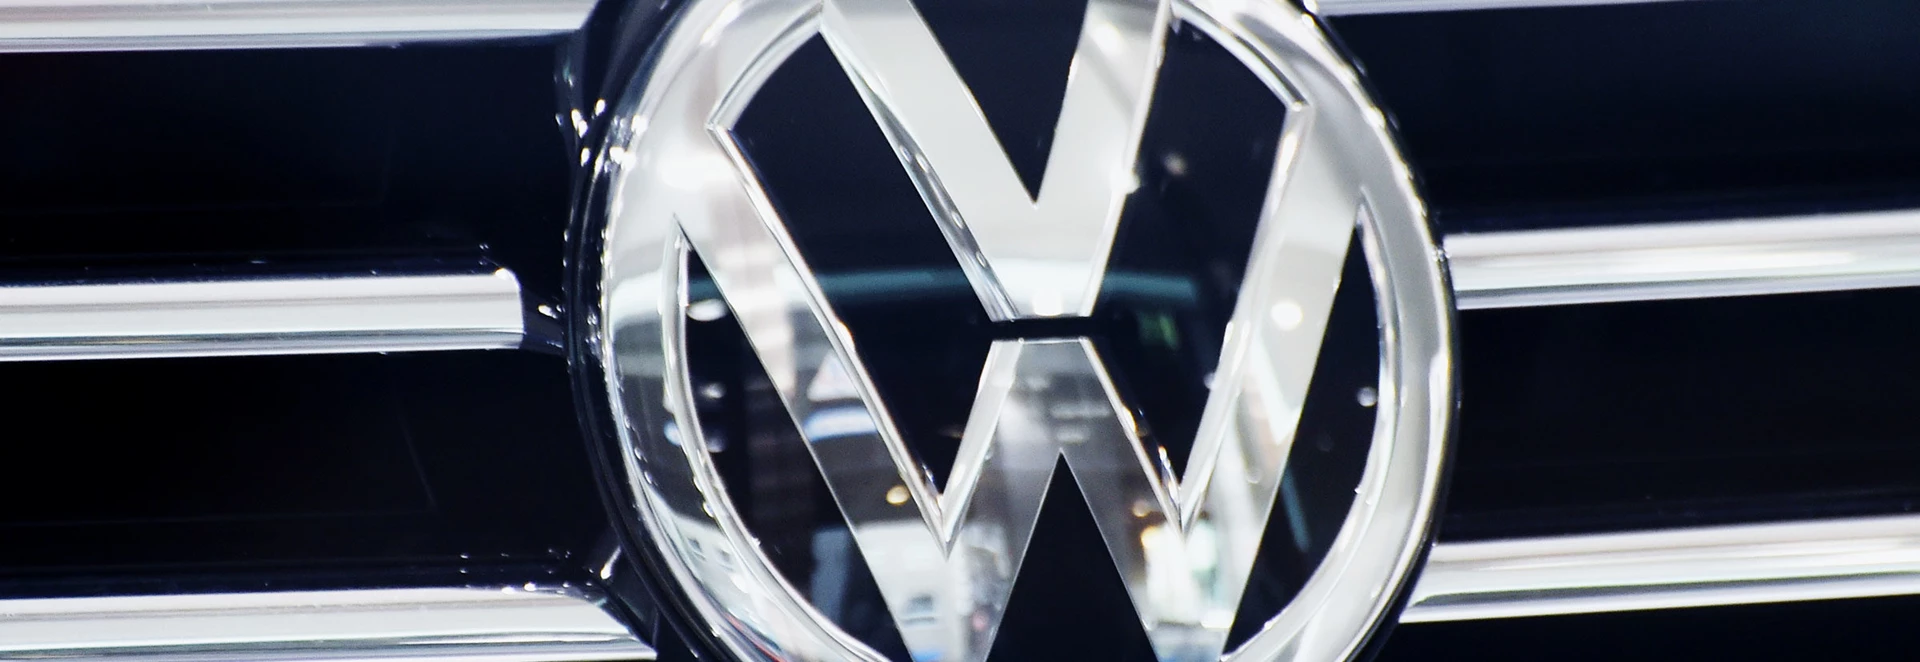 Hold bosses to account over ‘Dieselgate’, Volkswagen shareholders urged